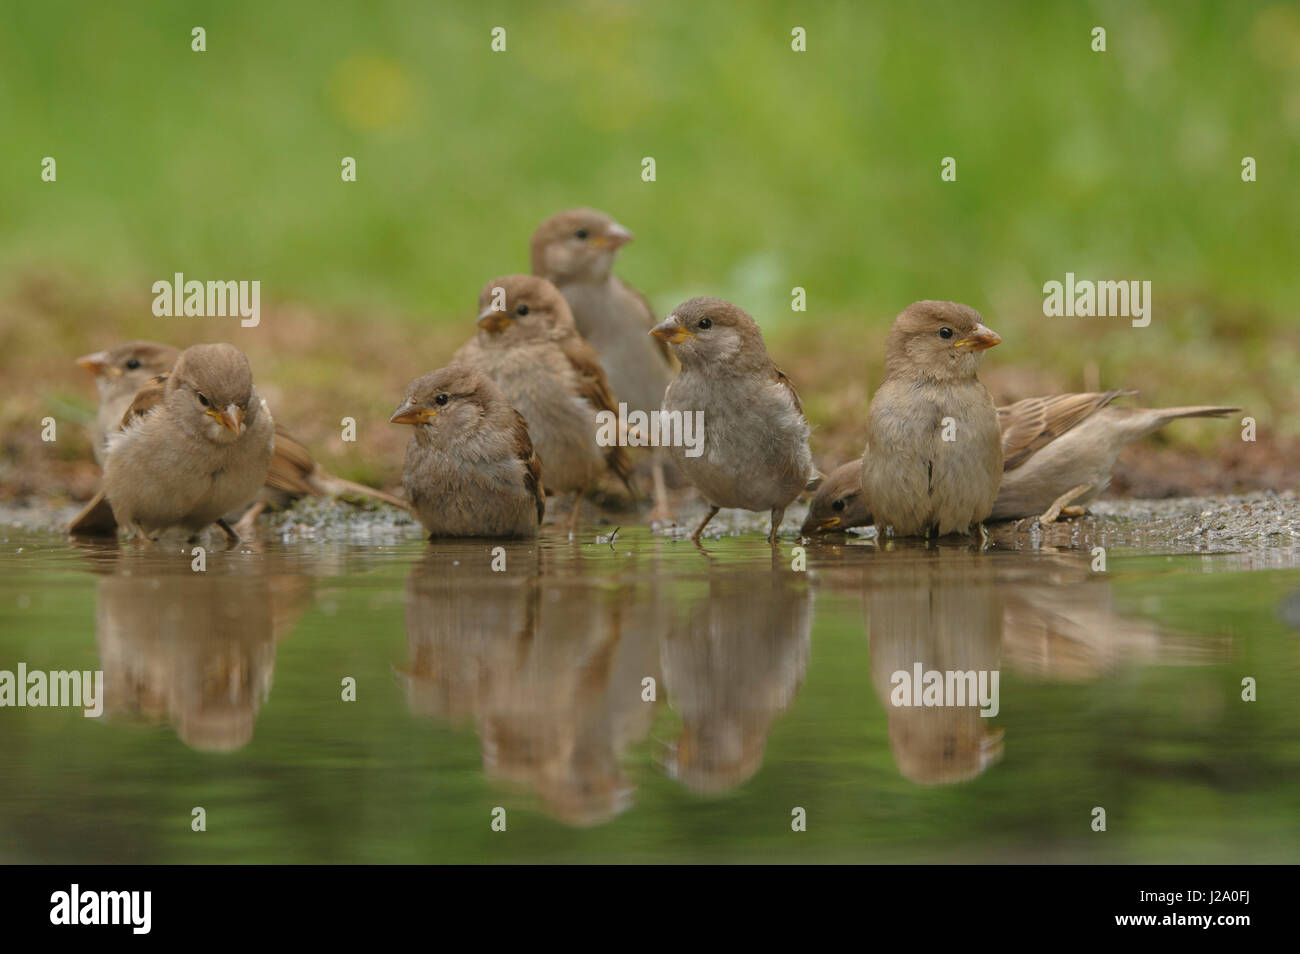 A group of young tree sparrows take a bath Stock Photo